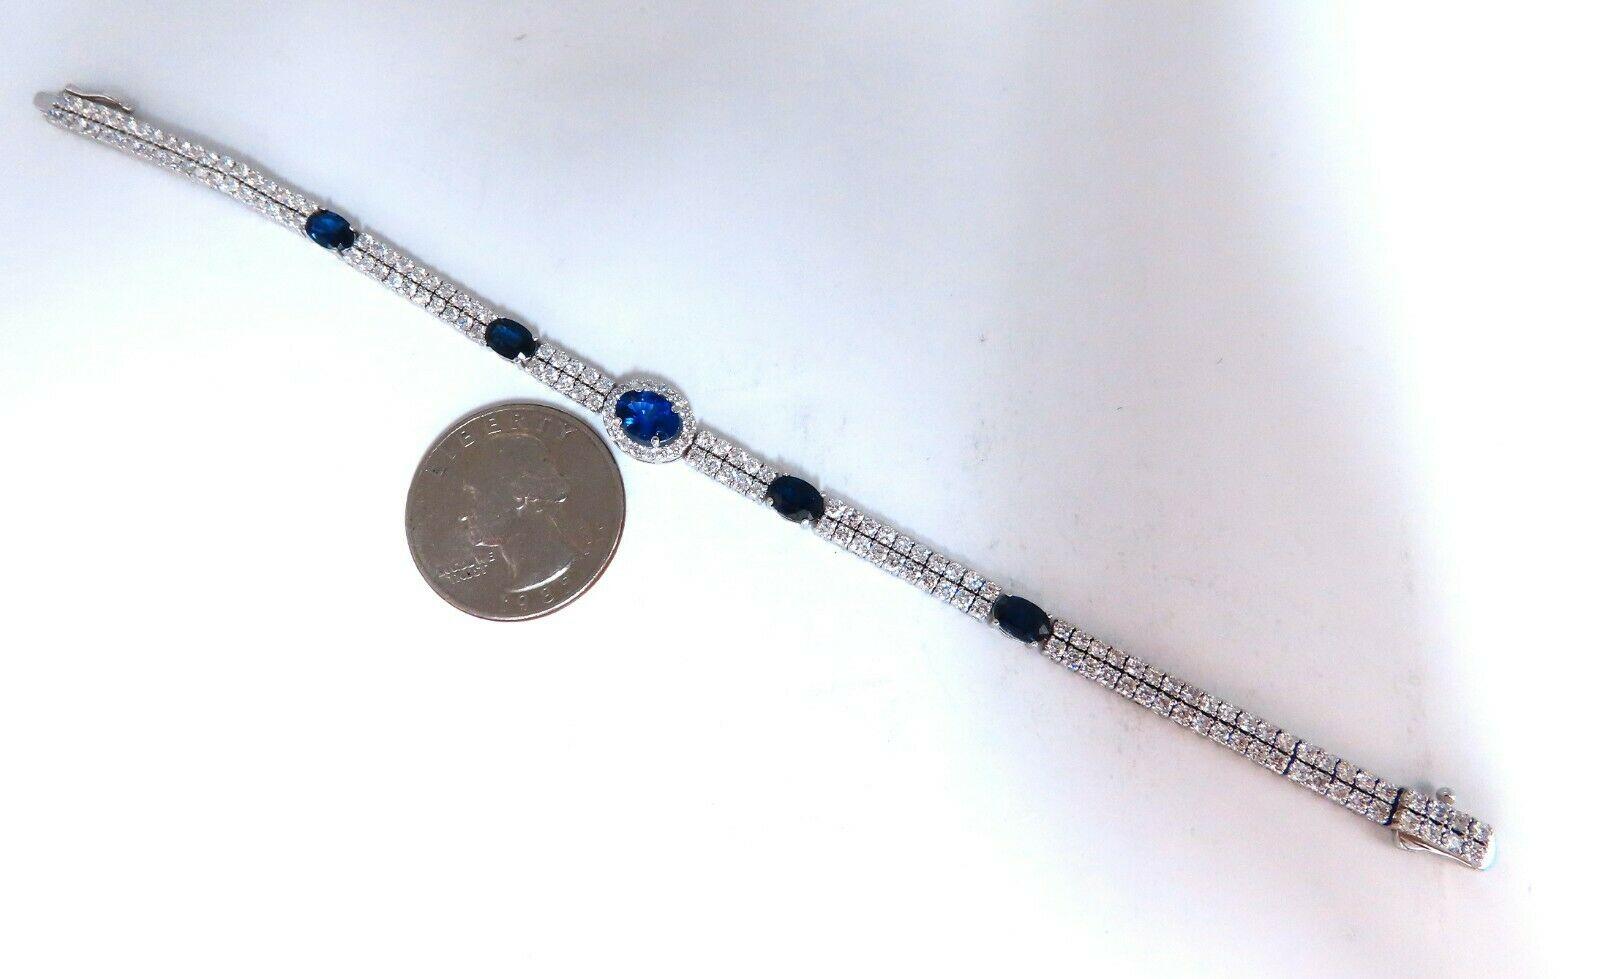 Americana Double Stranded Royal Blues.

Cluster Halo's

Natural Blue Sapphires bracelet.

1.06ct Center

2.52ct Sides

Clean Clarity & transparent.

 & 4.00ct Diamonds.

Full Round cuts, great sparkle.

Clean Clarity & Transparent.

Center Halo: 8.7